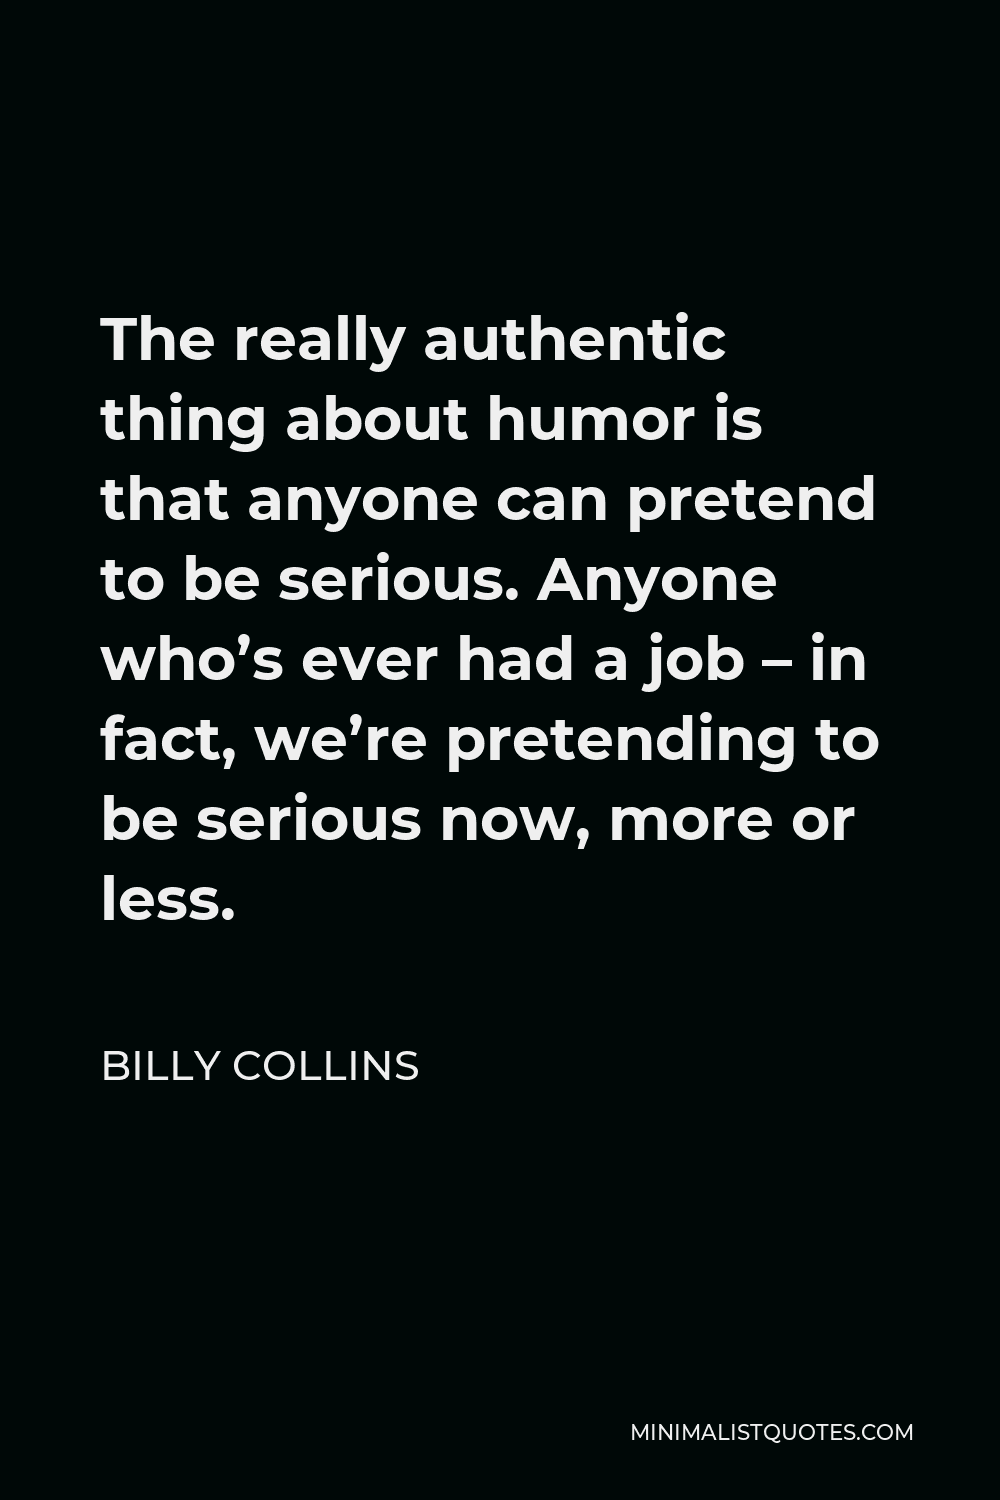 Billy Collins Quote - The really authentic thing about humor is that anyone can pretend to be serious. Anyone who’s ever had a job – in fact, we’re pretending to be serious now, more or less.